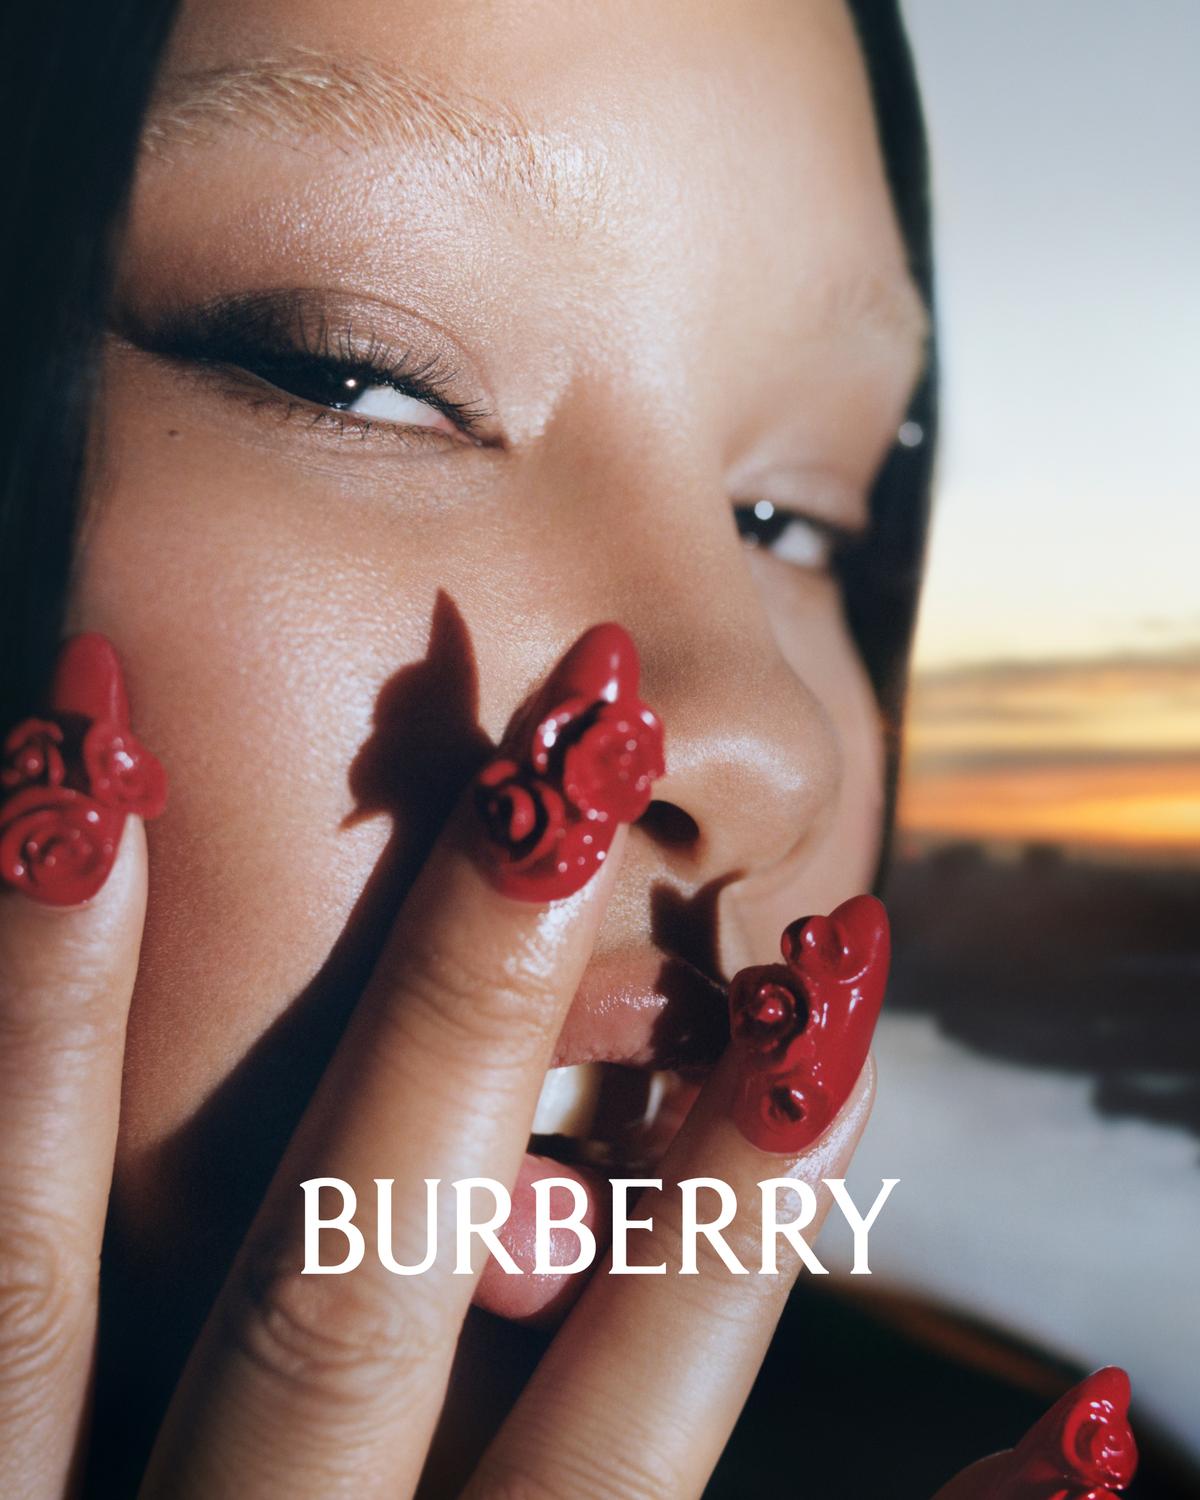 burberry campagne marque